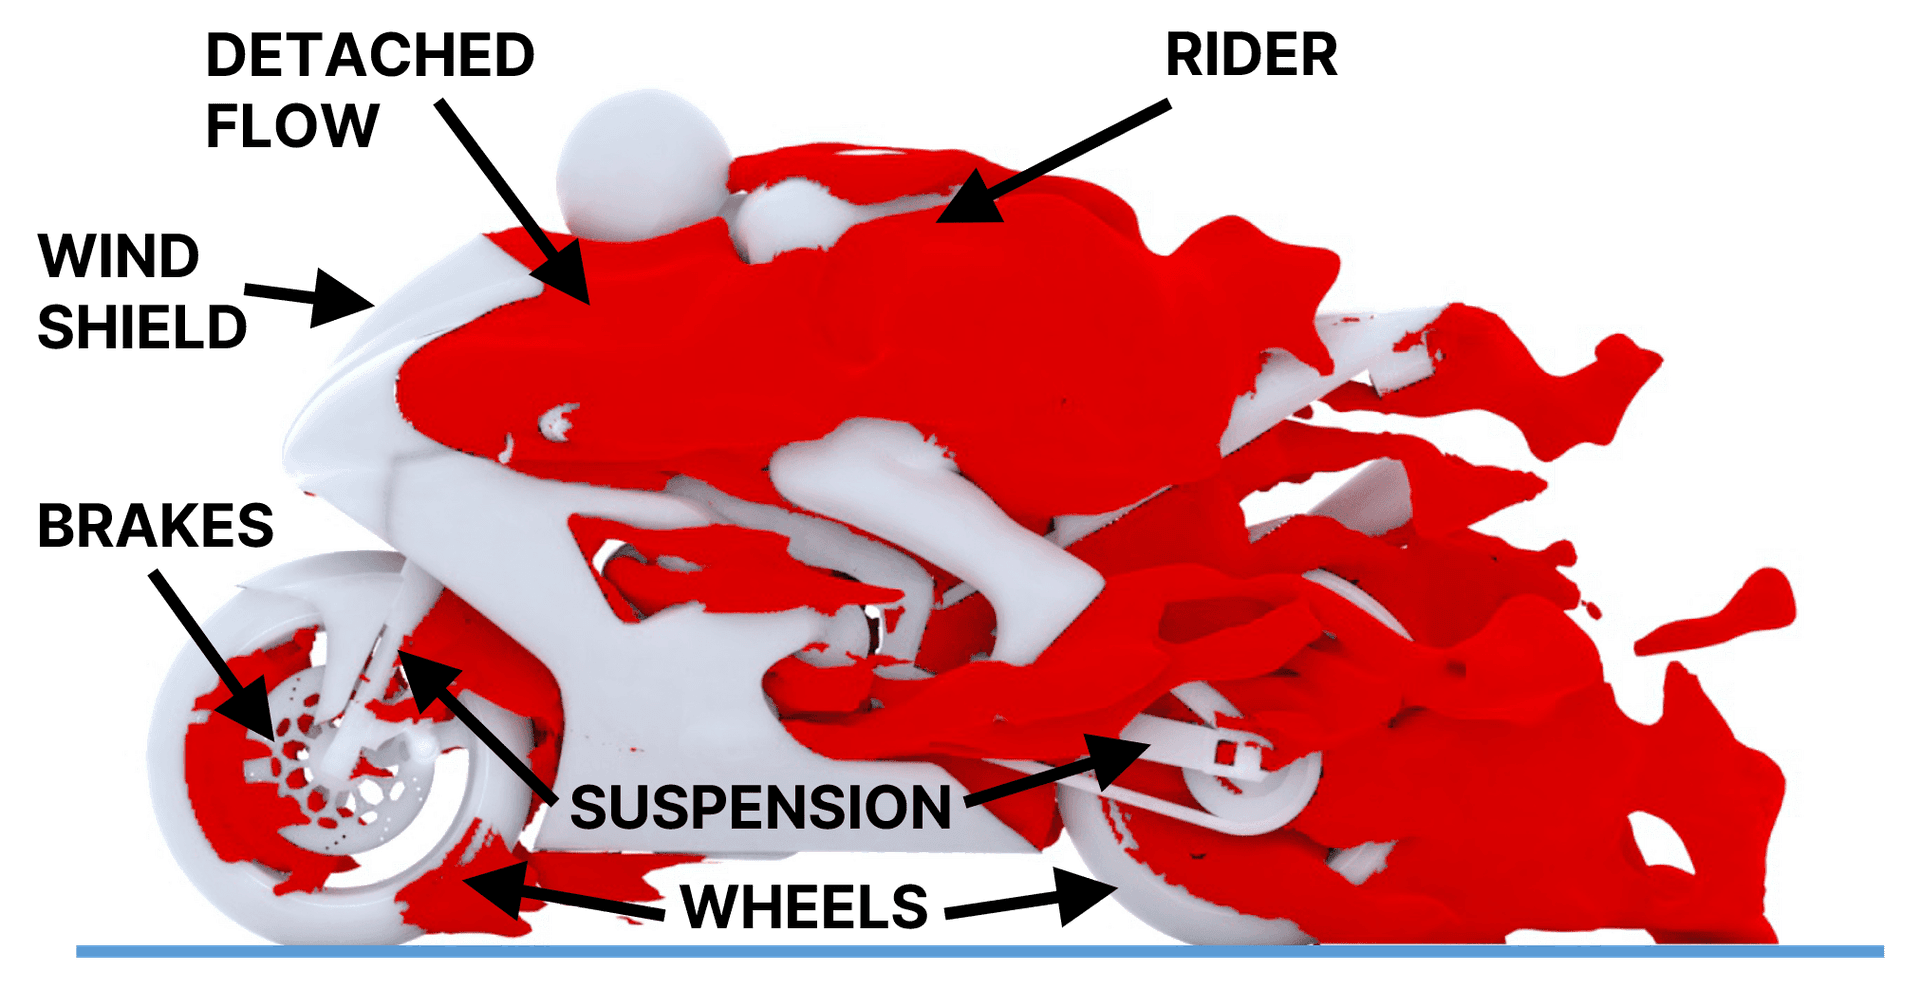 The red surfaces show the wakes generated from flow separation on a motorcycle